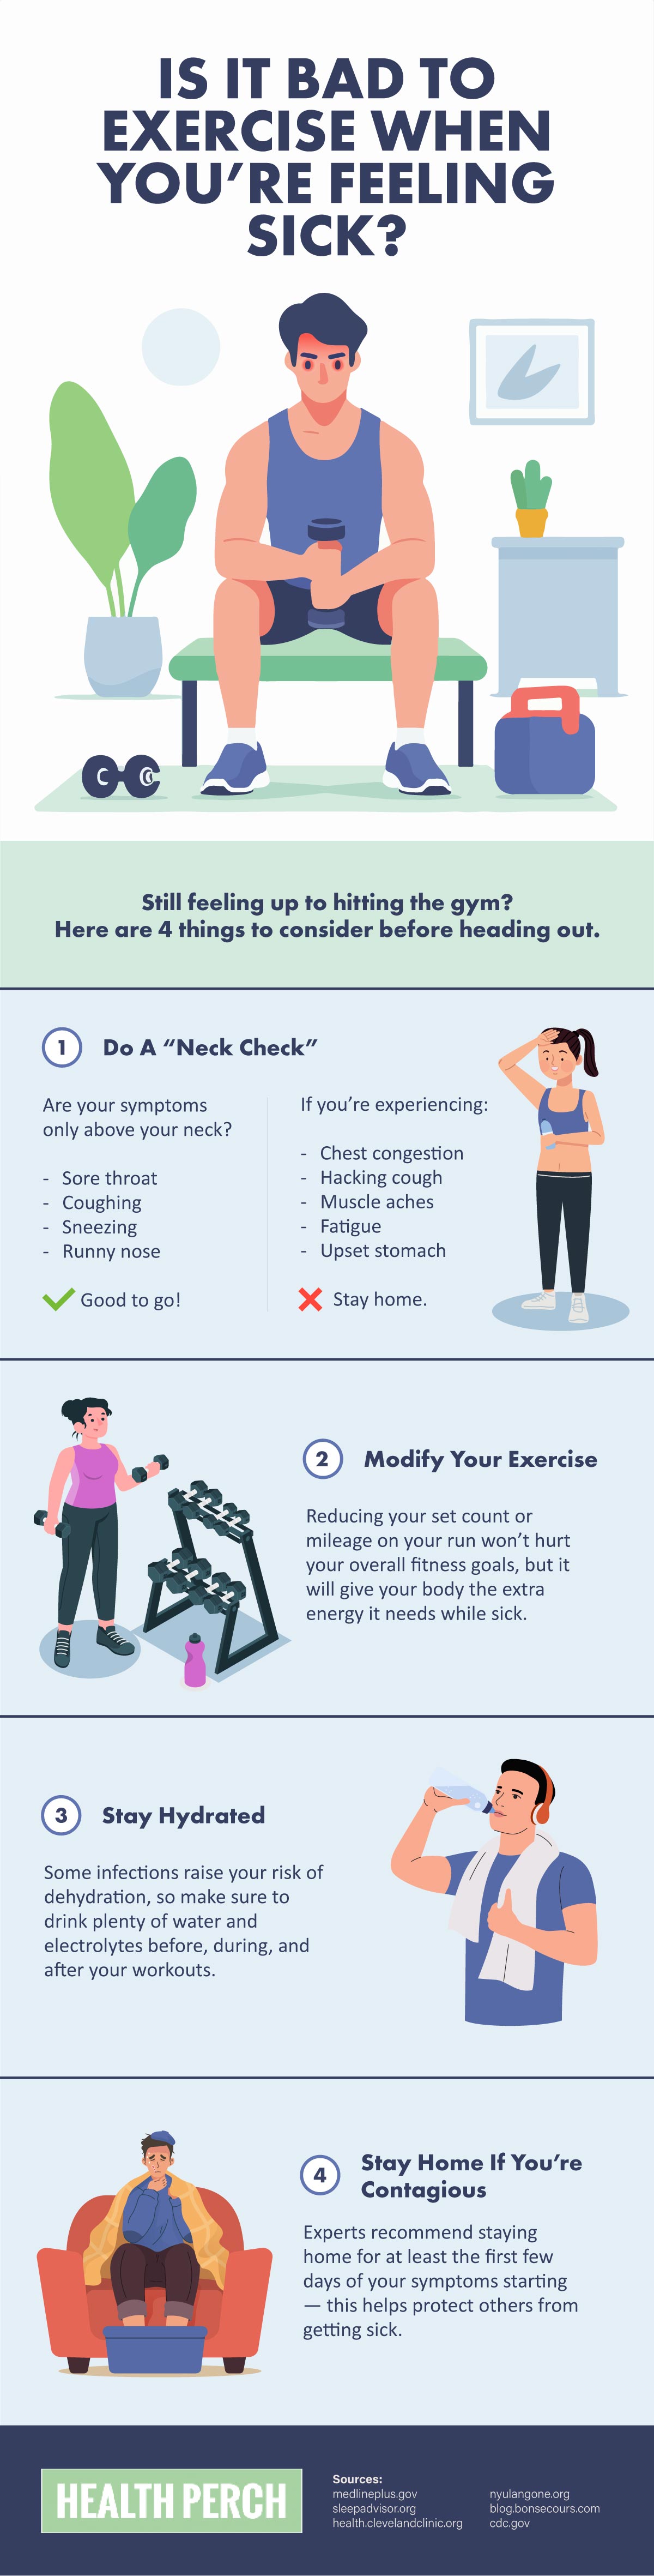 Is It Bad to Exercise When You’re Feeling Sick Infographic